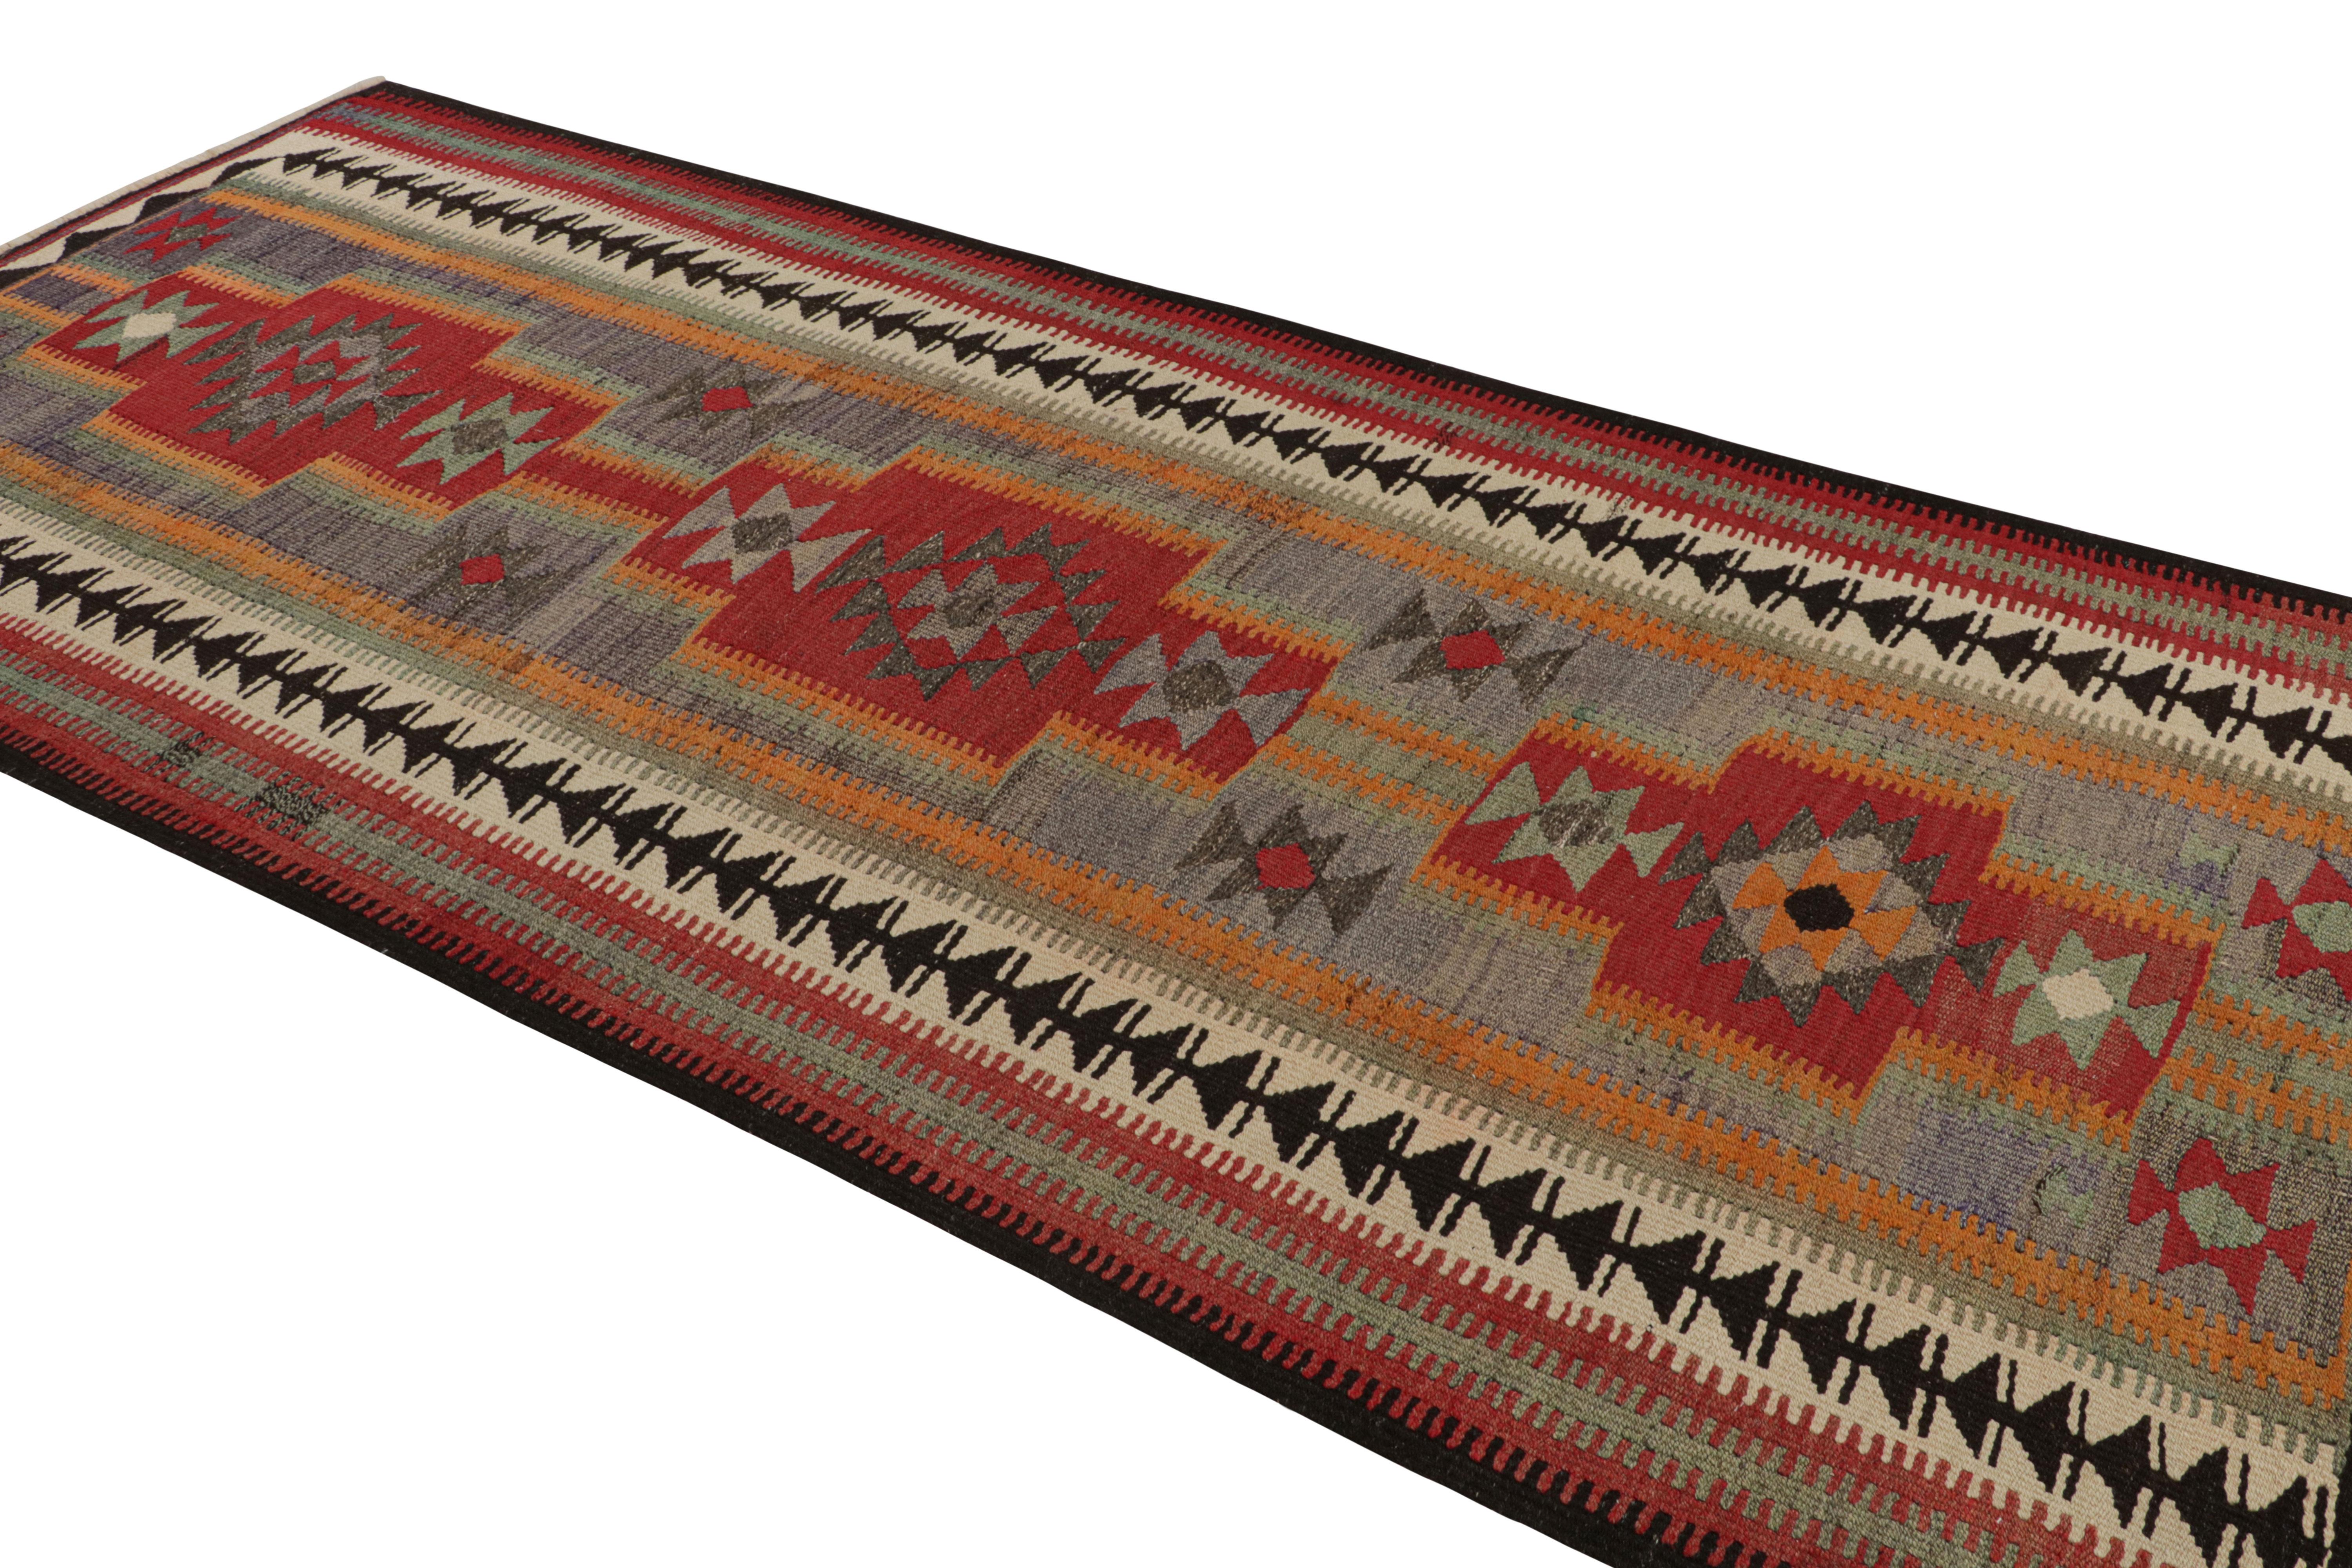 Persian 1950s Vintage Kilim rug in Red Blue, Multicolor Geometric Pattern by Rug & Kilim For Sale